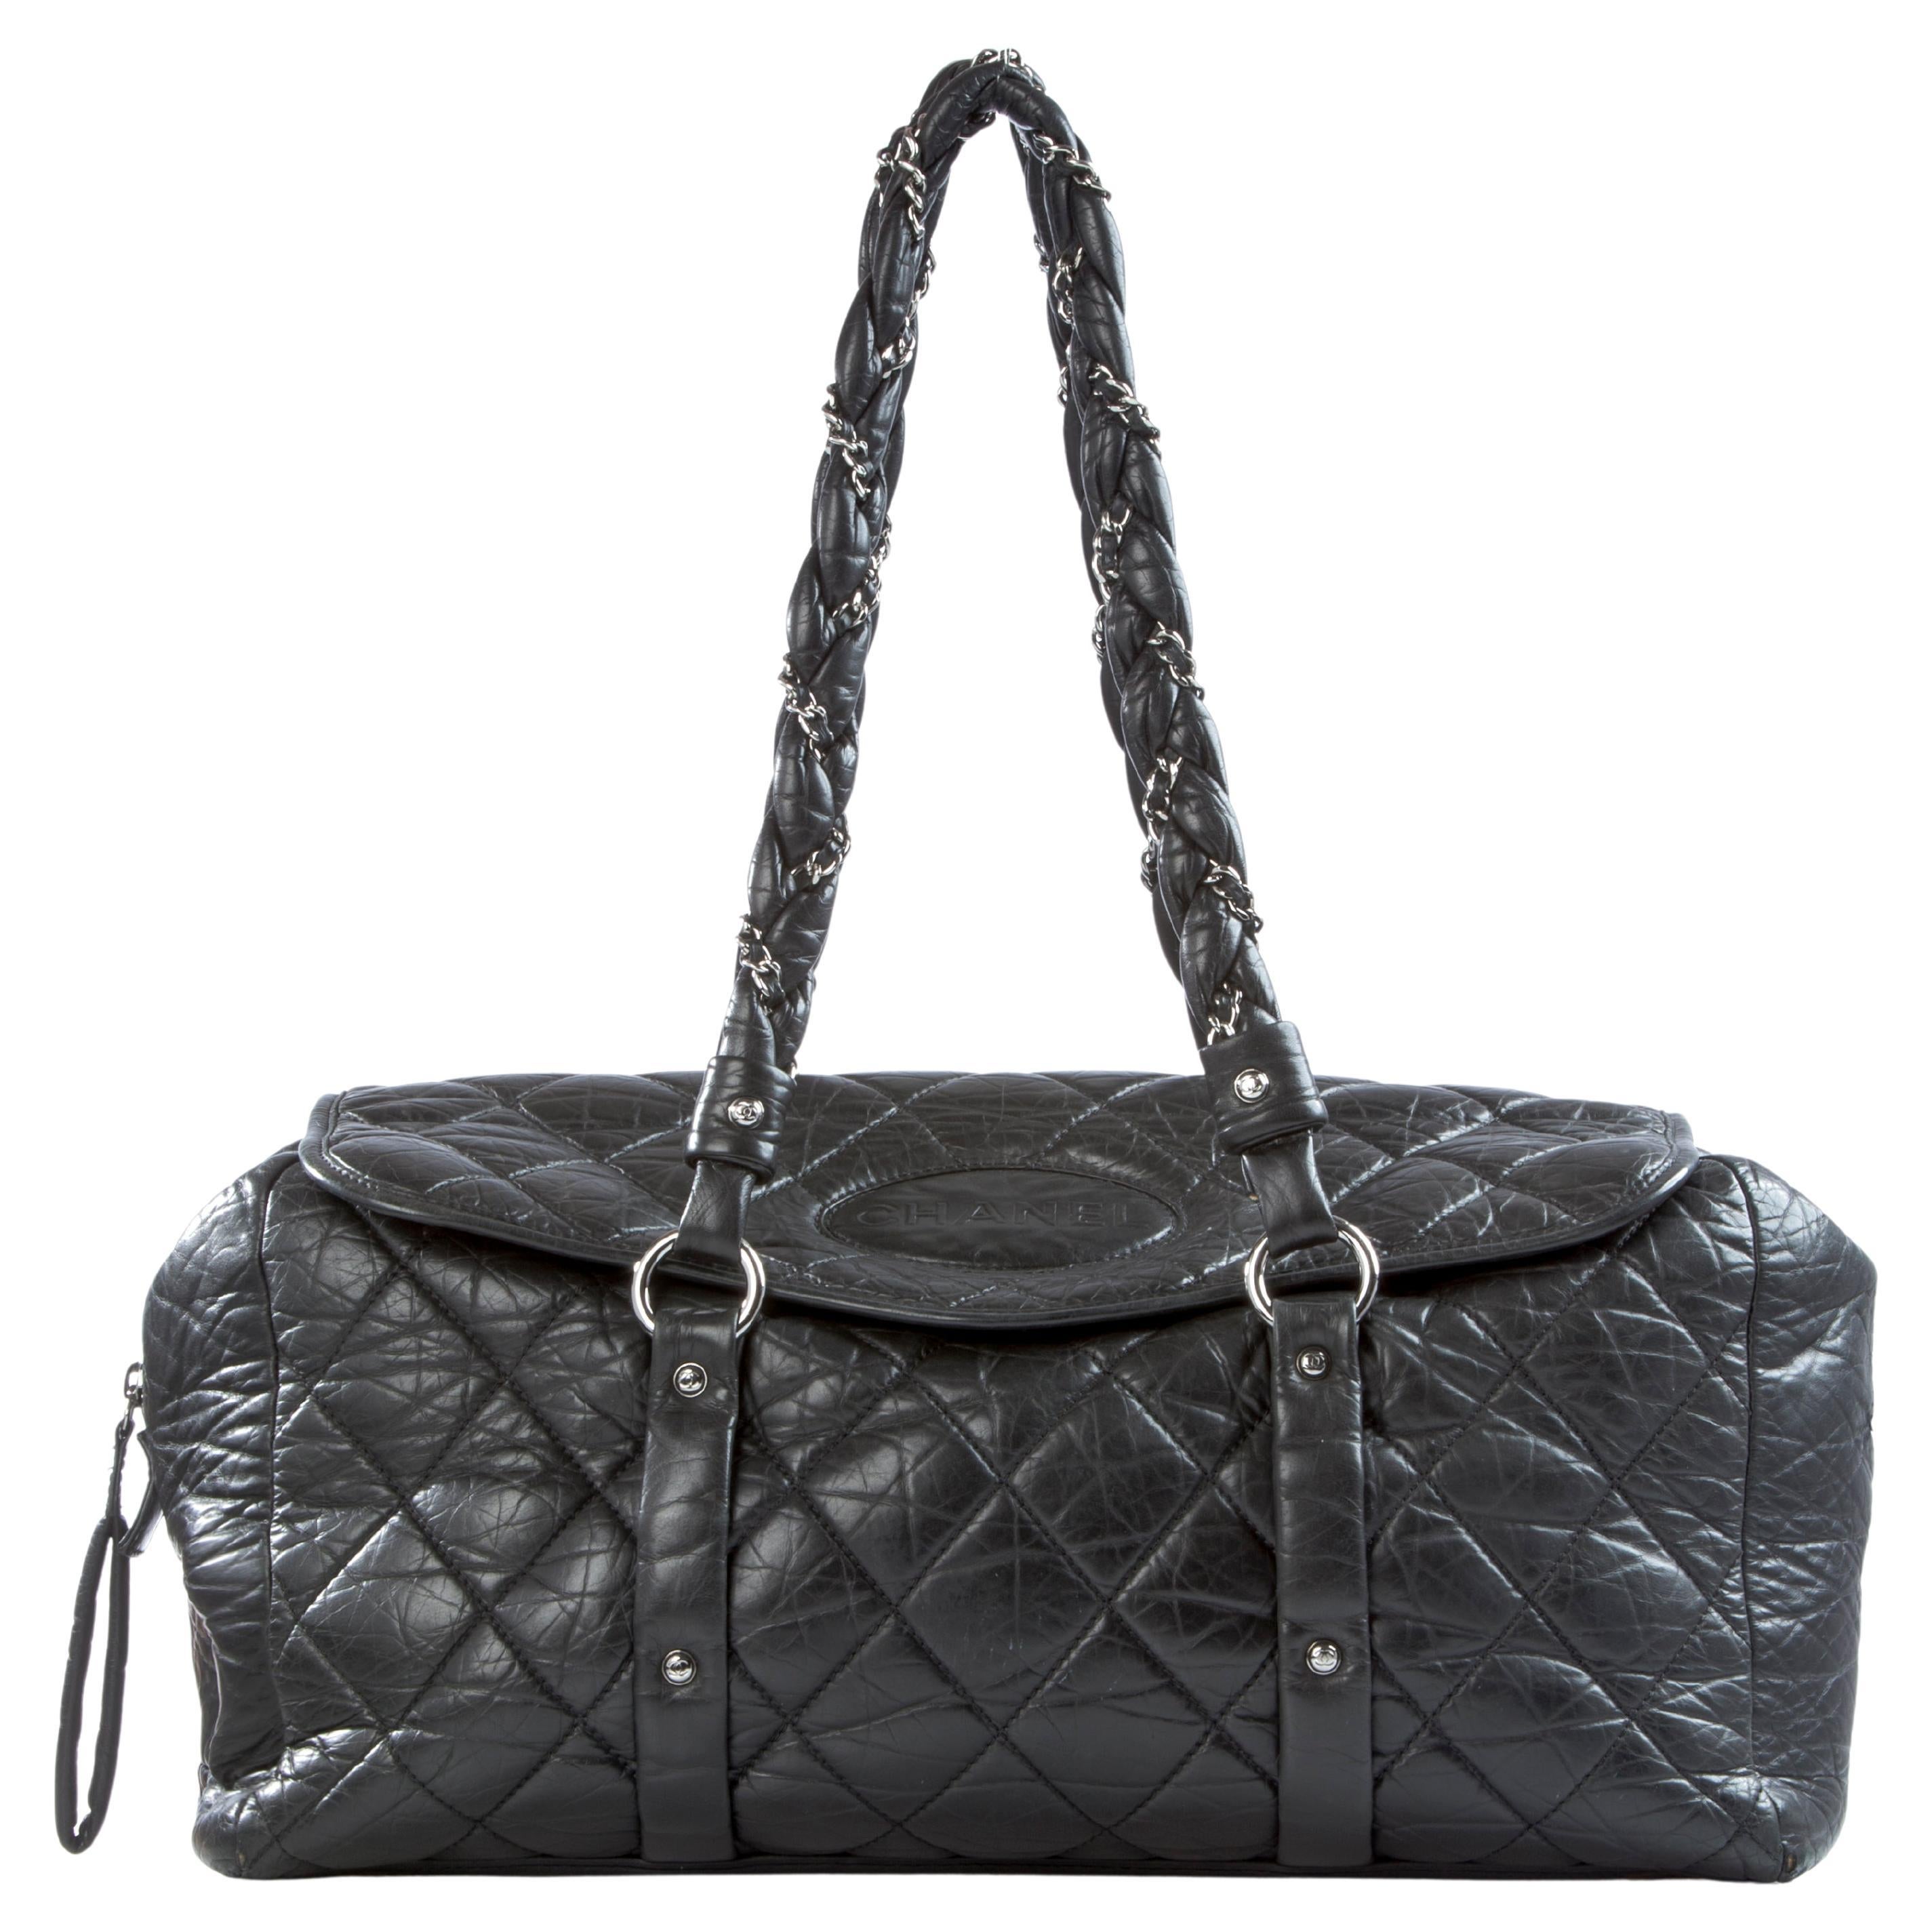 Large size Chanel distressed calfskin black tote with interwoven braided straps and flap

2006 {VINTAGE 16 Years}
Silver hardware
Chanel name stamp
Double strap
Interior graffiti lining
Large hidden interior back pocket
Magnetic flap